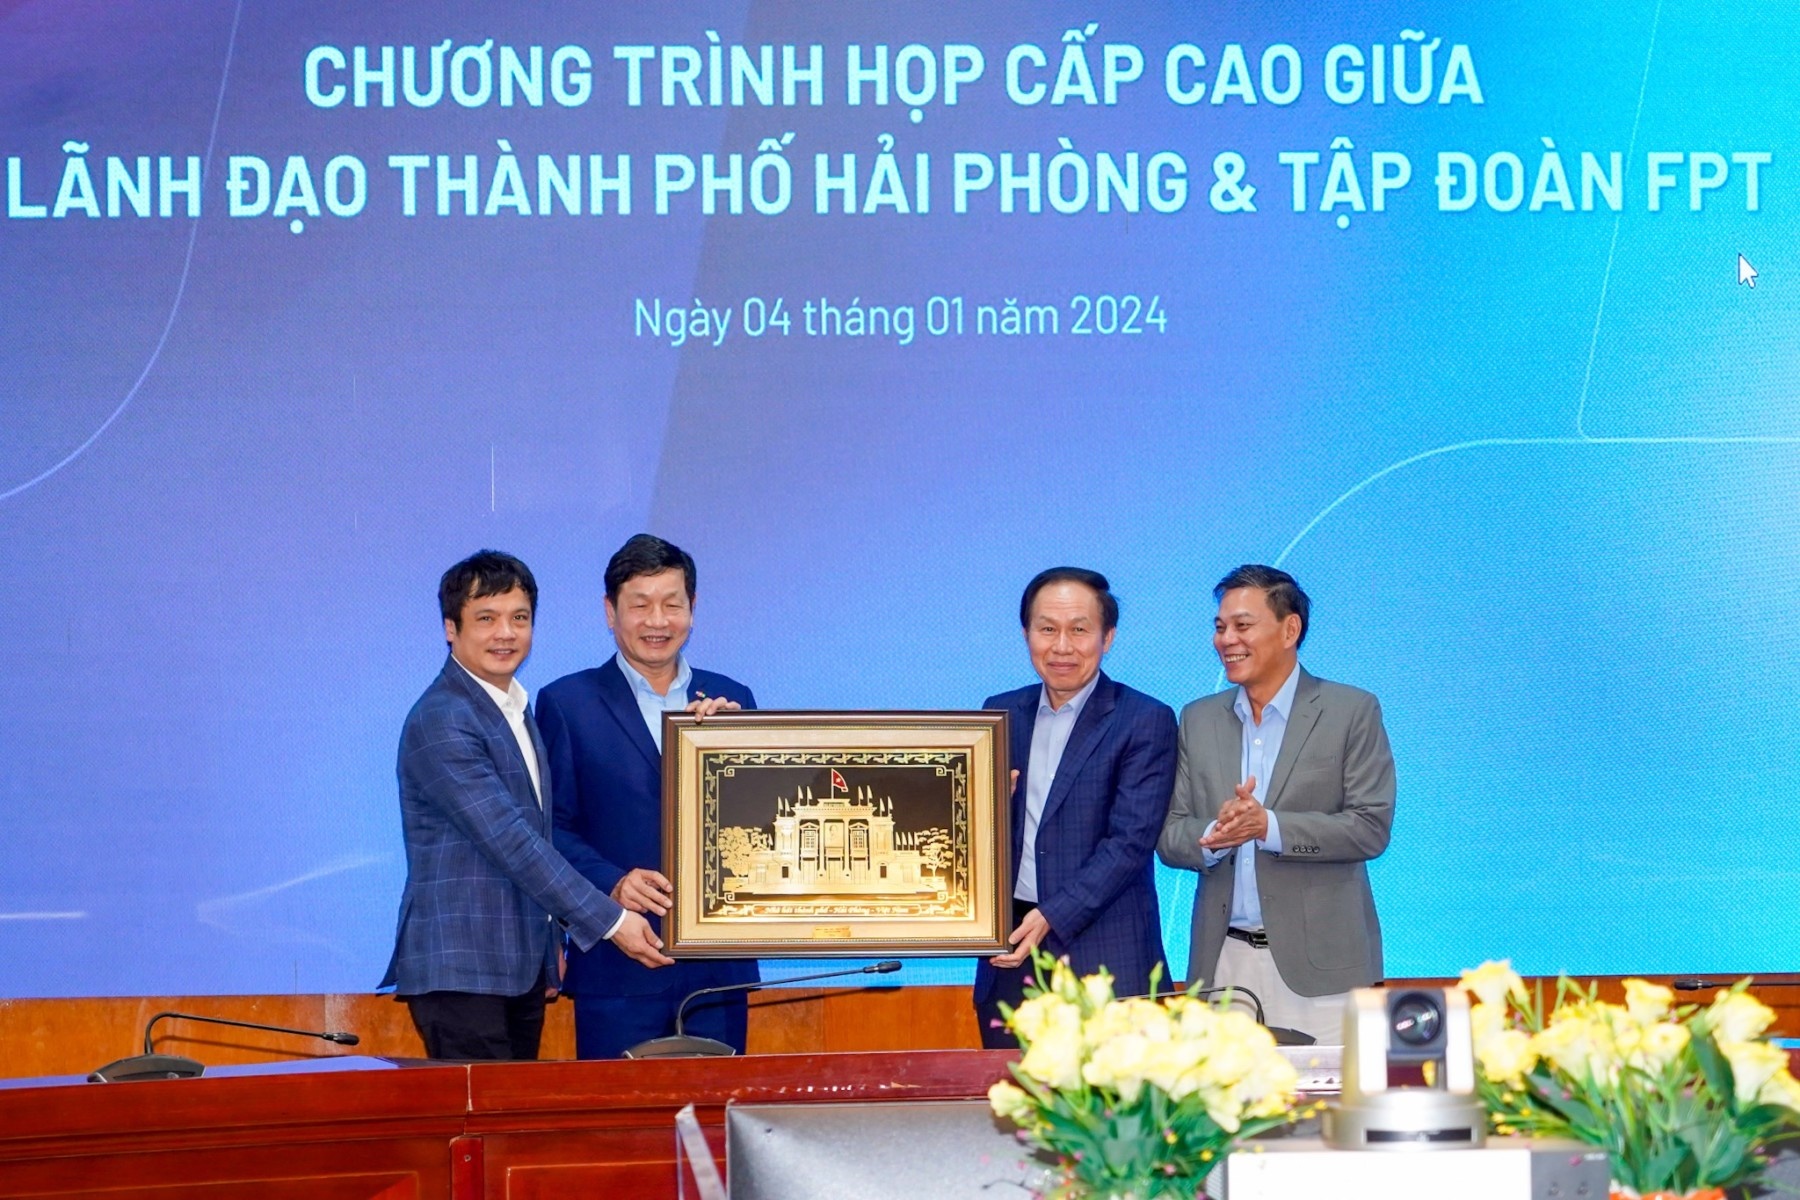 FPT Group to spearhead major educational and digital initiatives in Haiphong